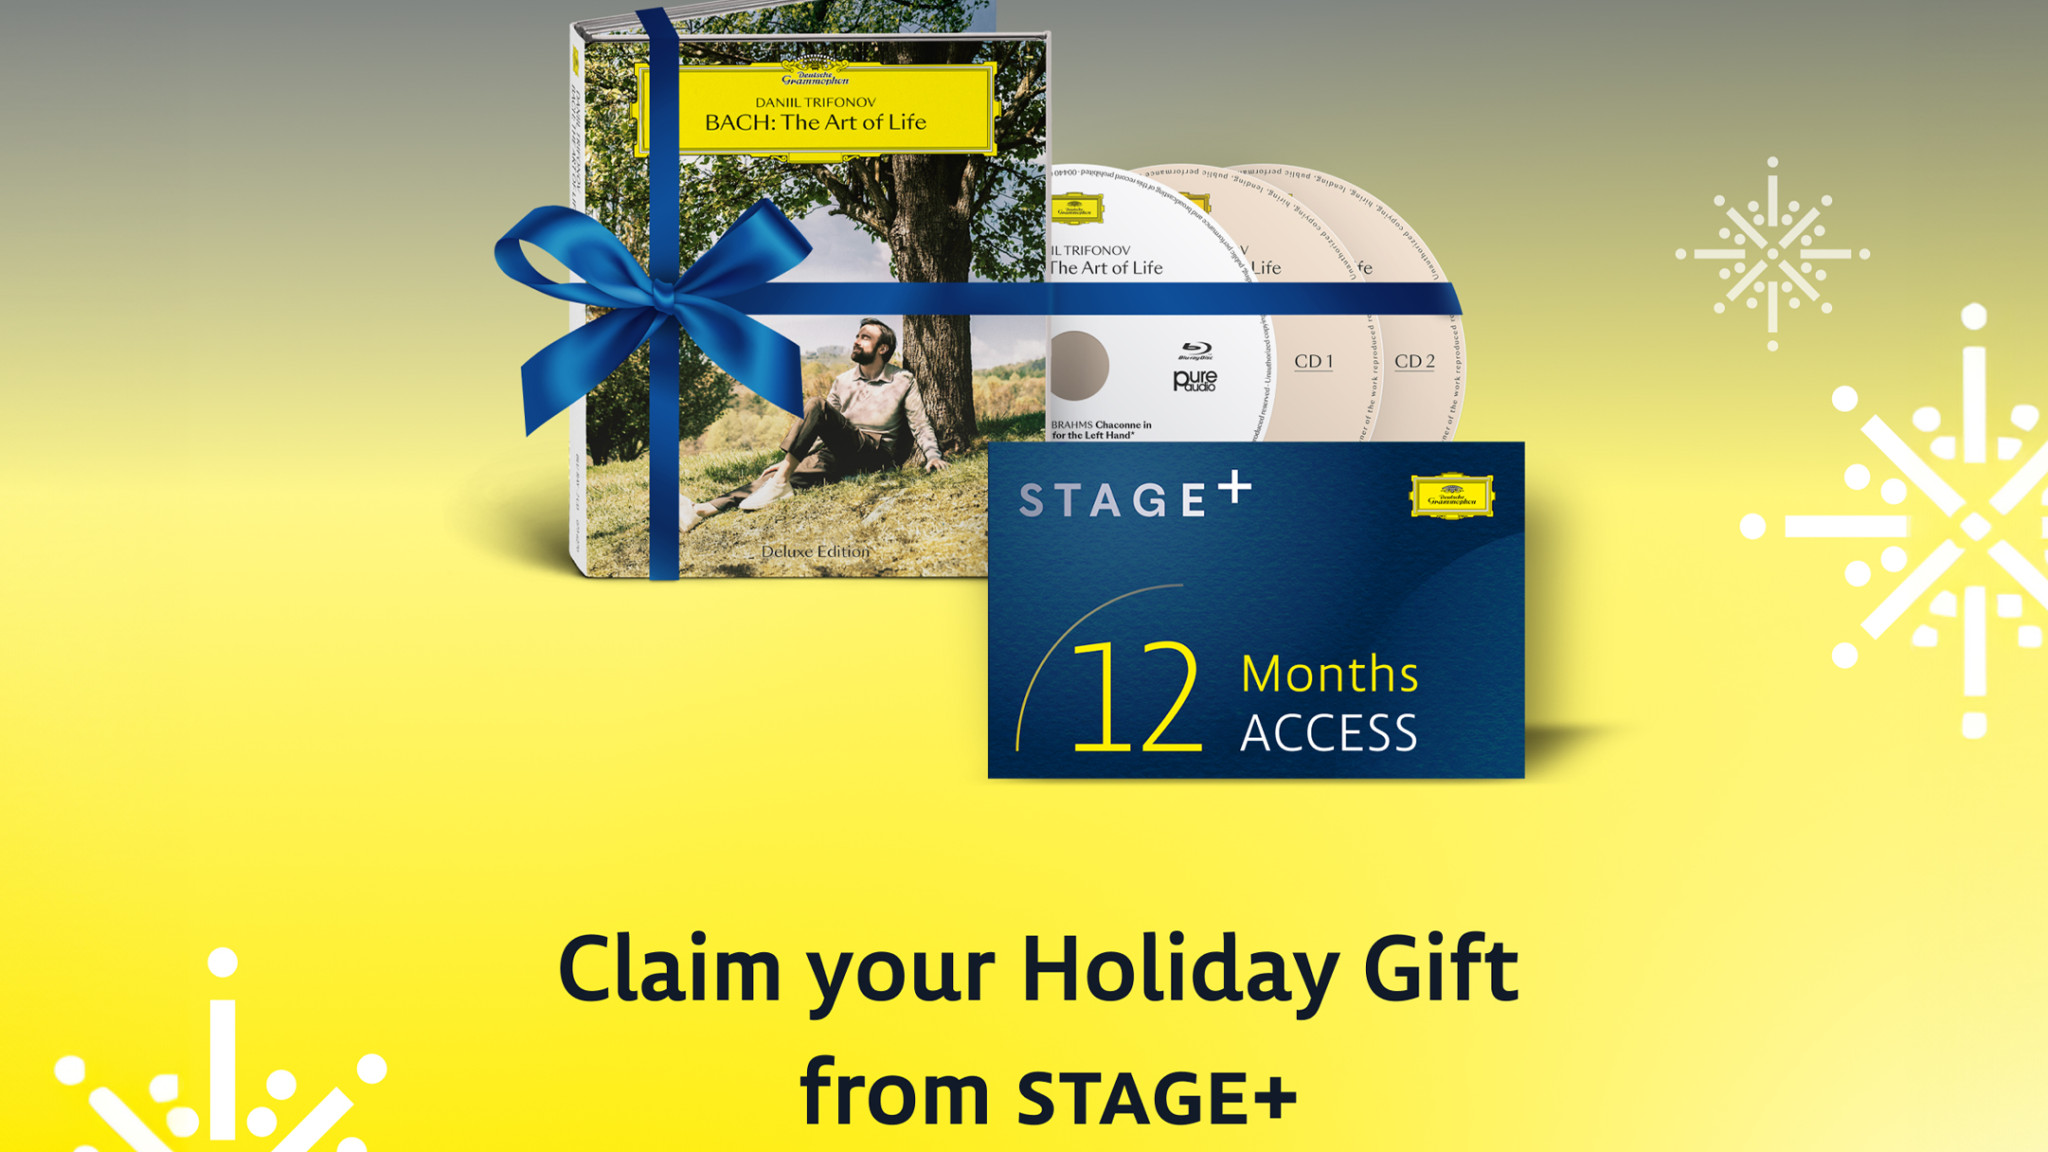 Your Holiday Gift from STAGE+